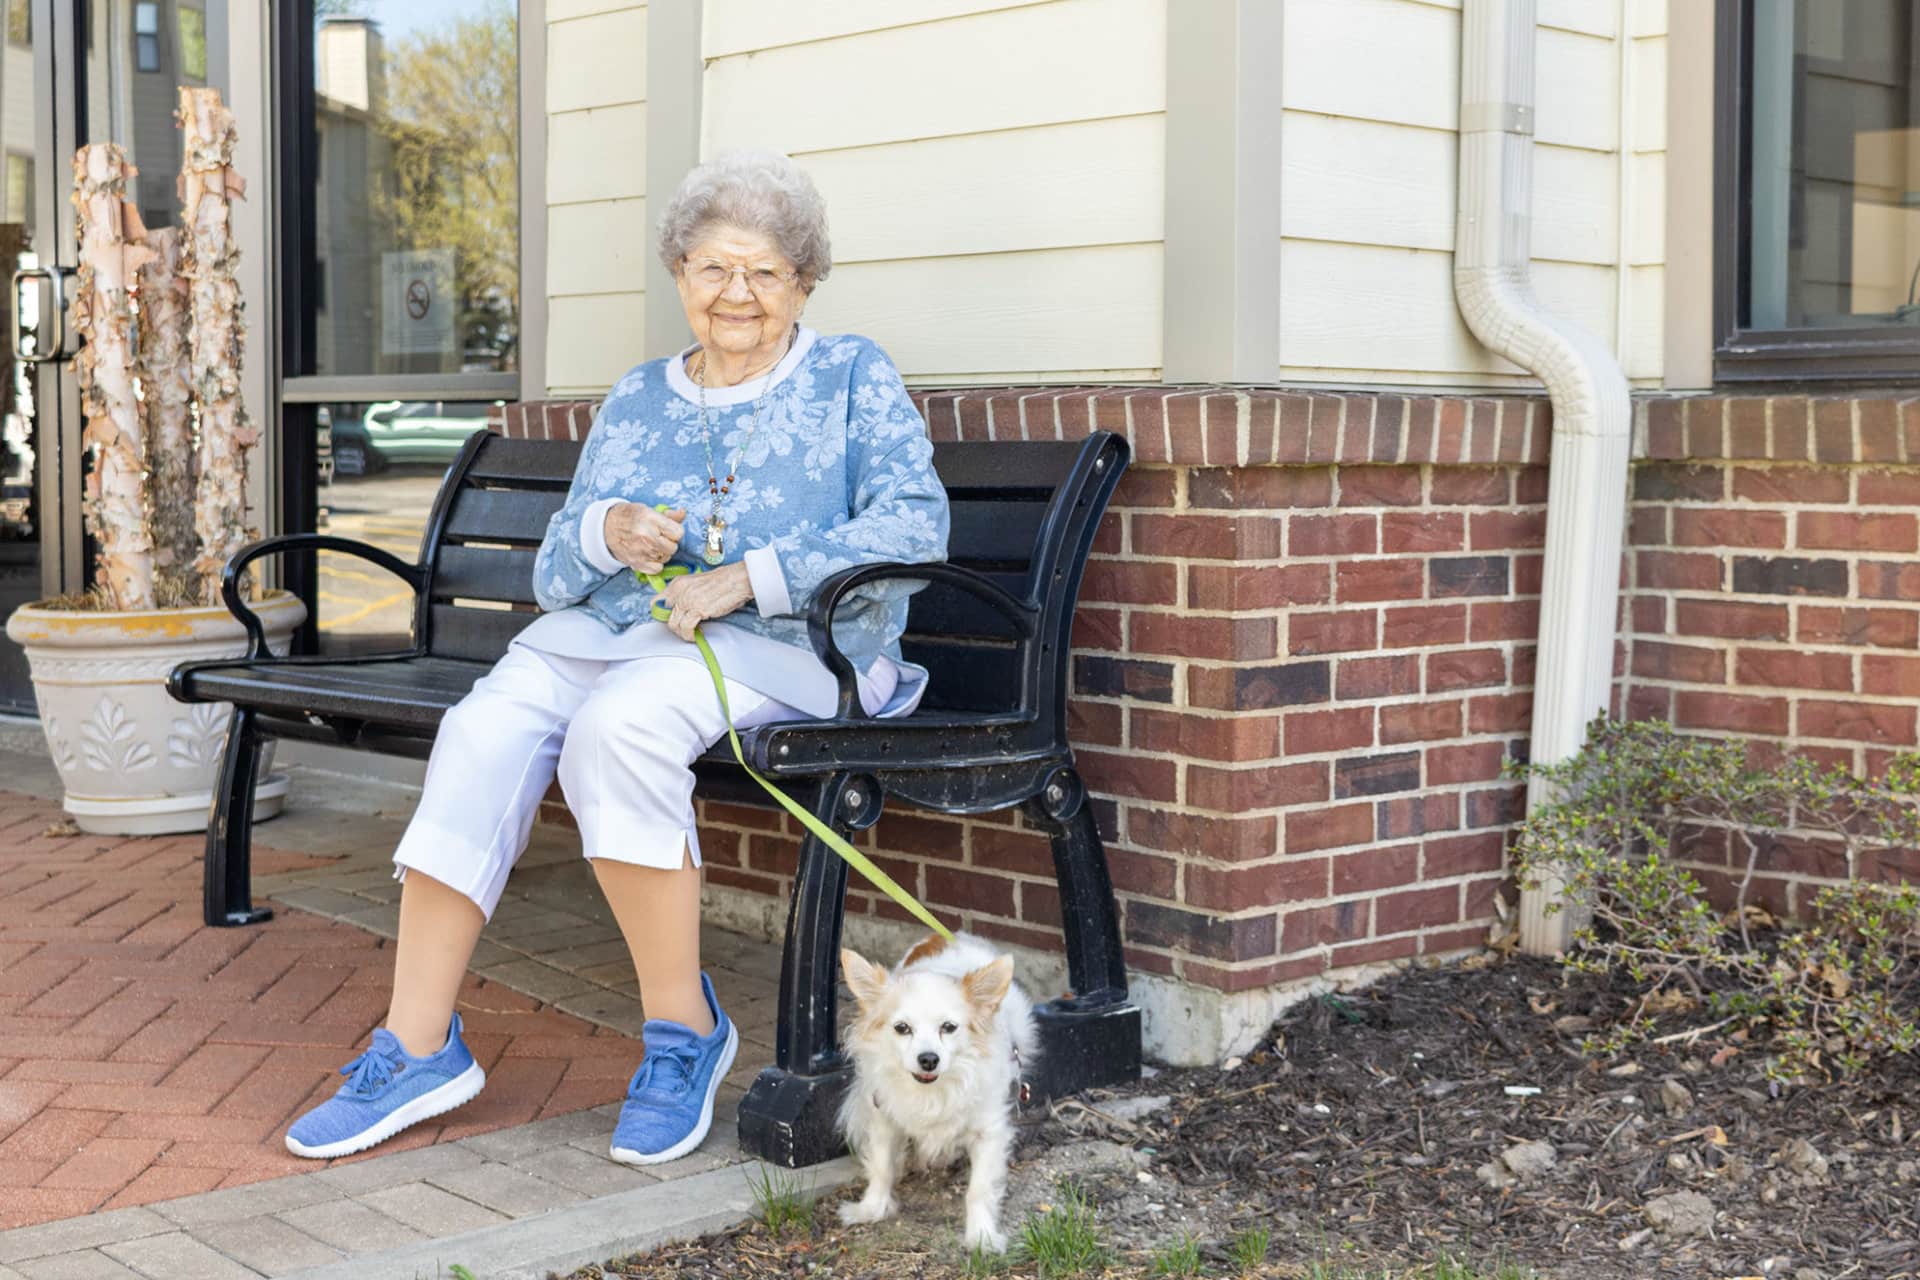 A Terrace residence sitting down on a bench after walking her dog